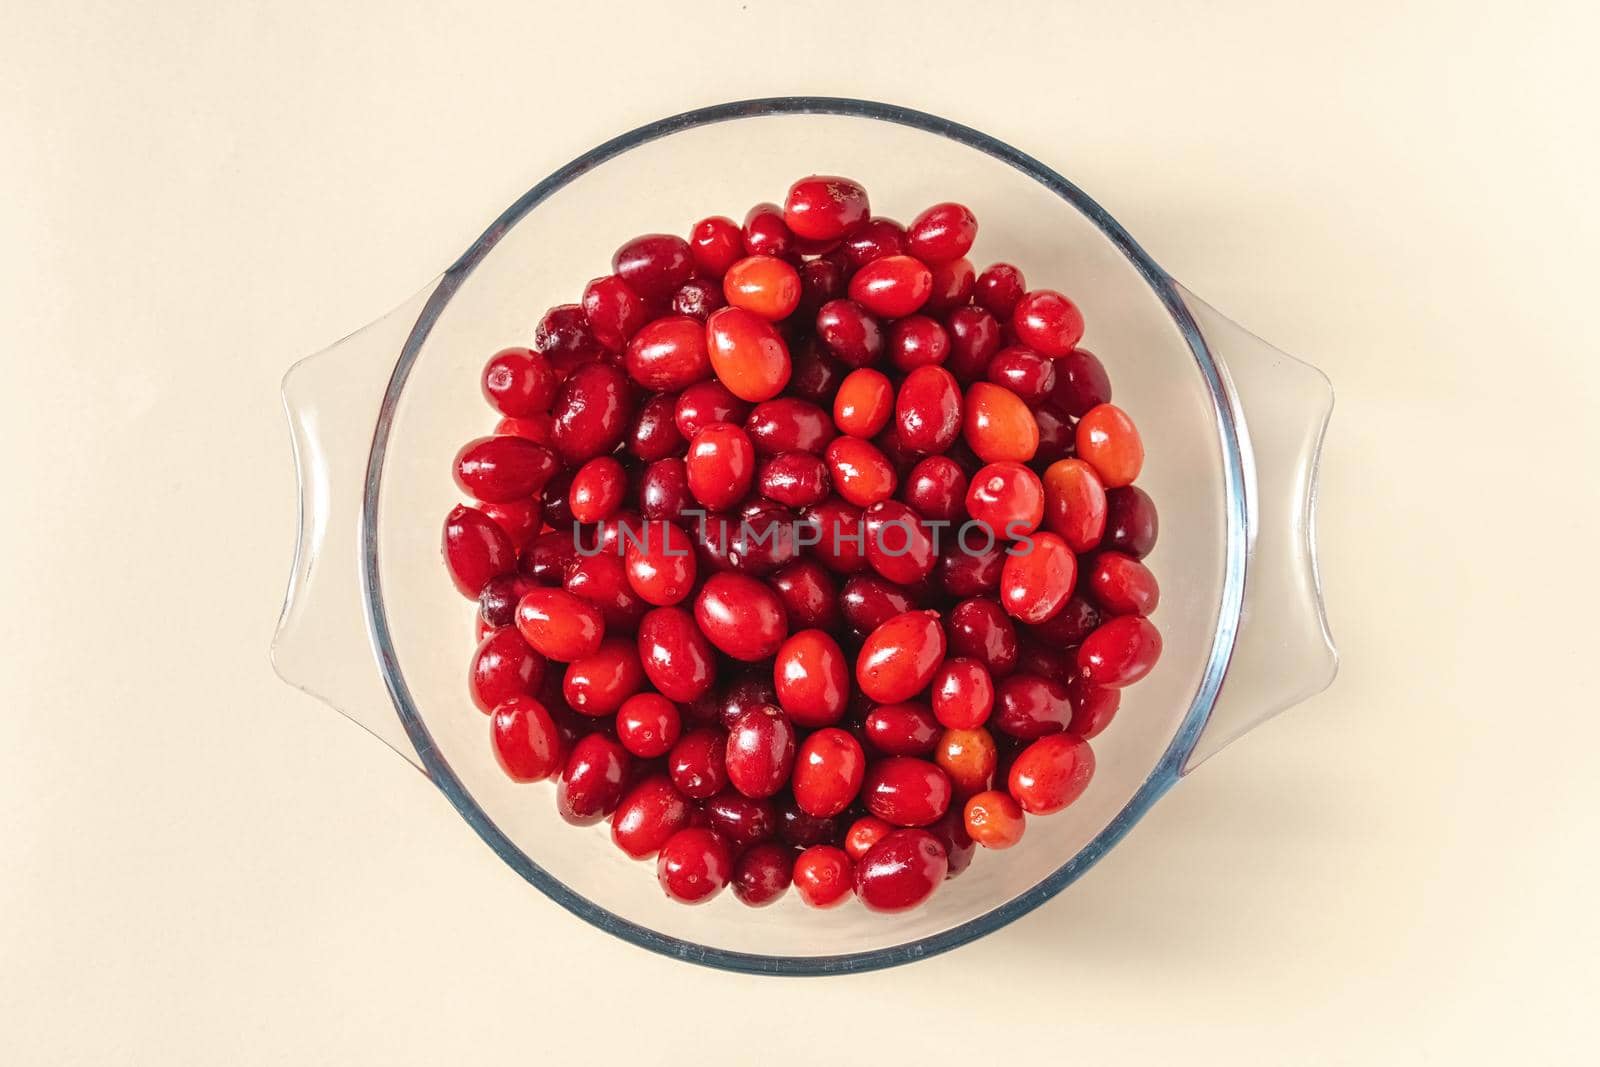 Fresh cranberries in a glass bowl. Healthy eating concept by Sonat